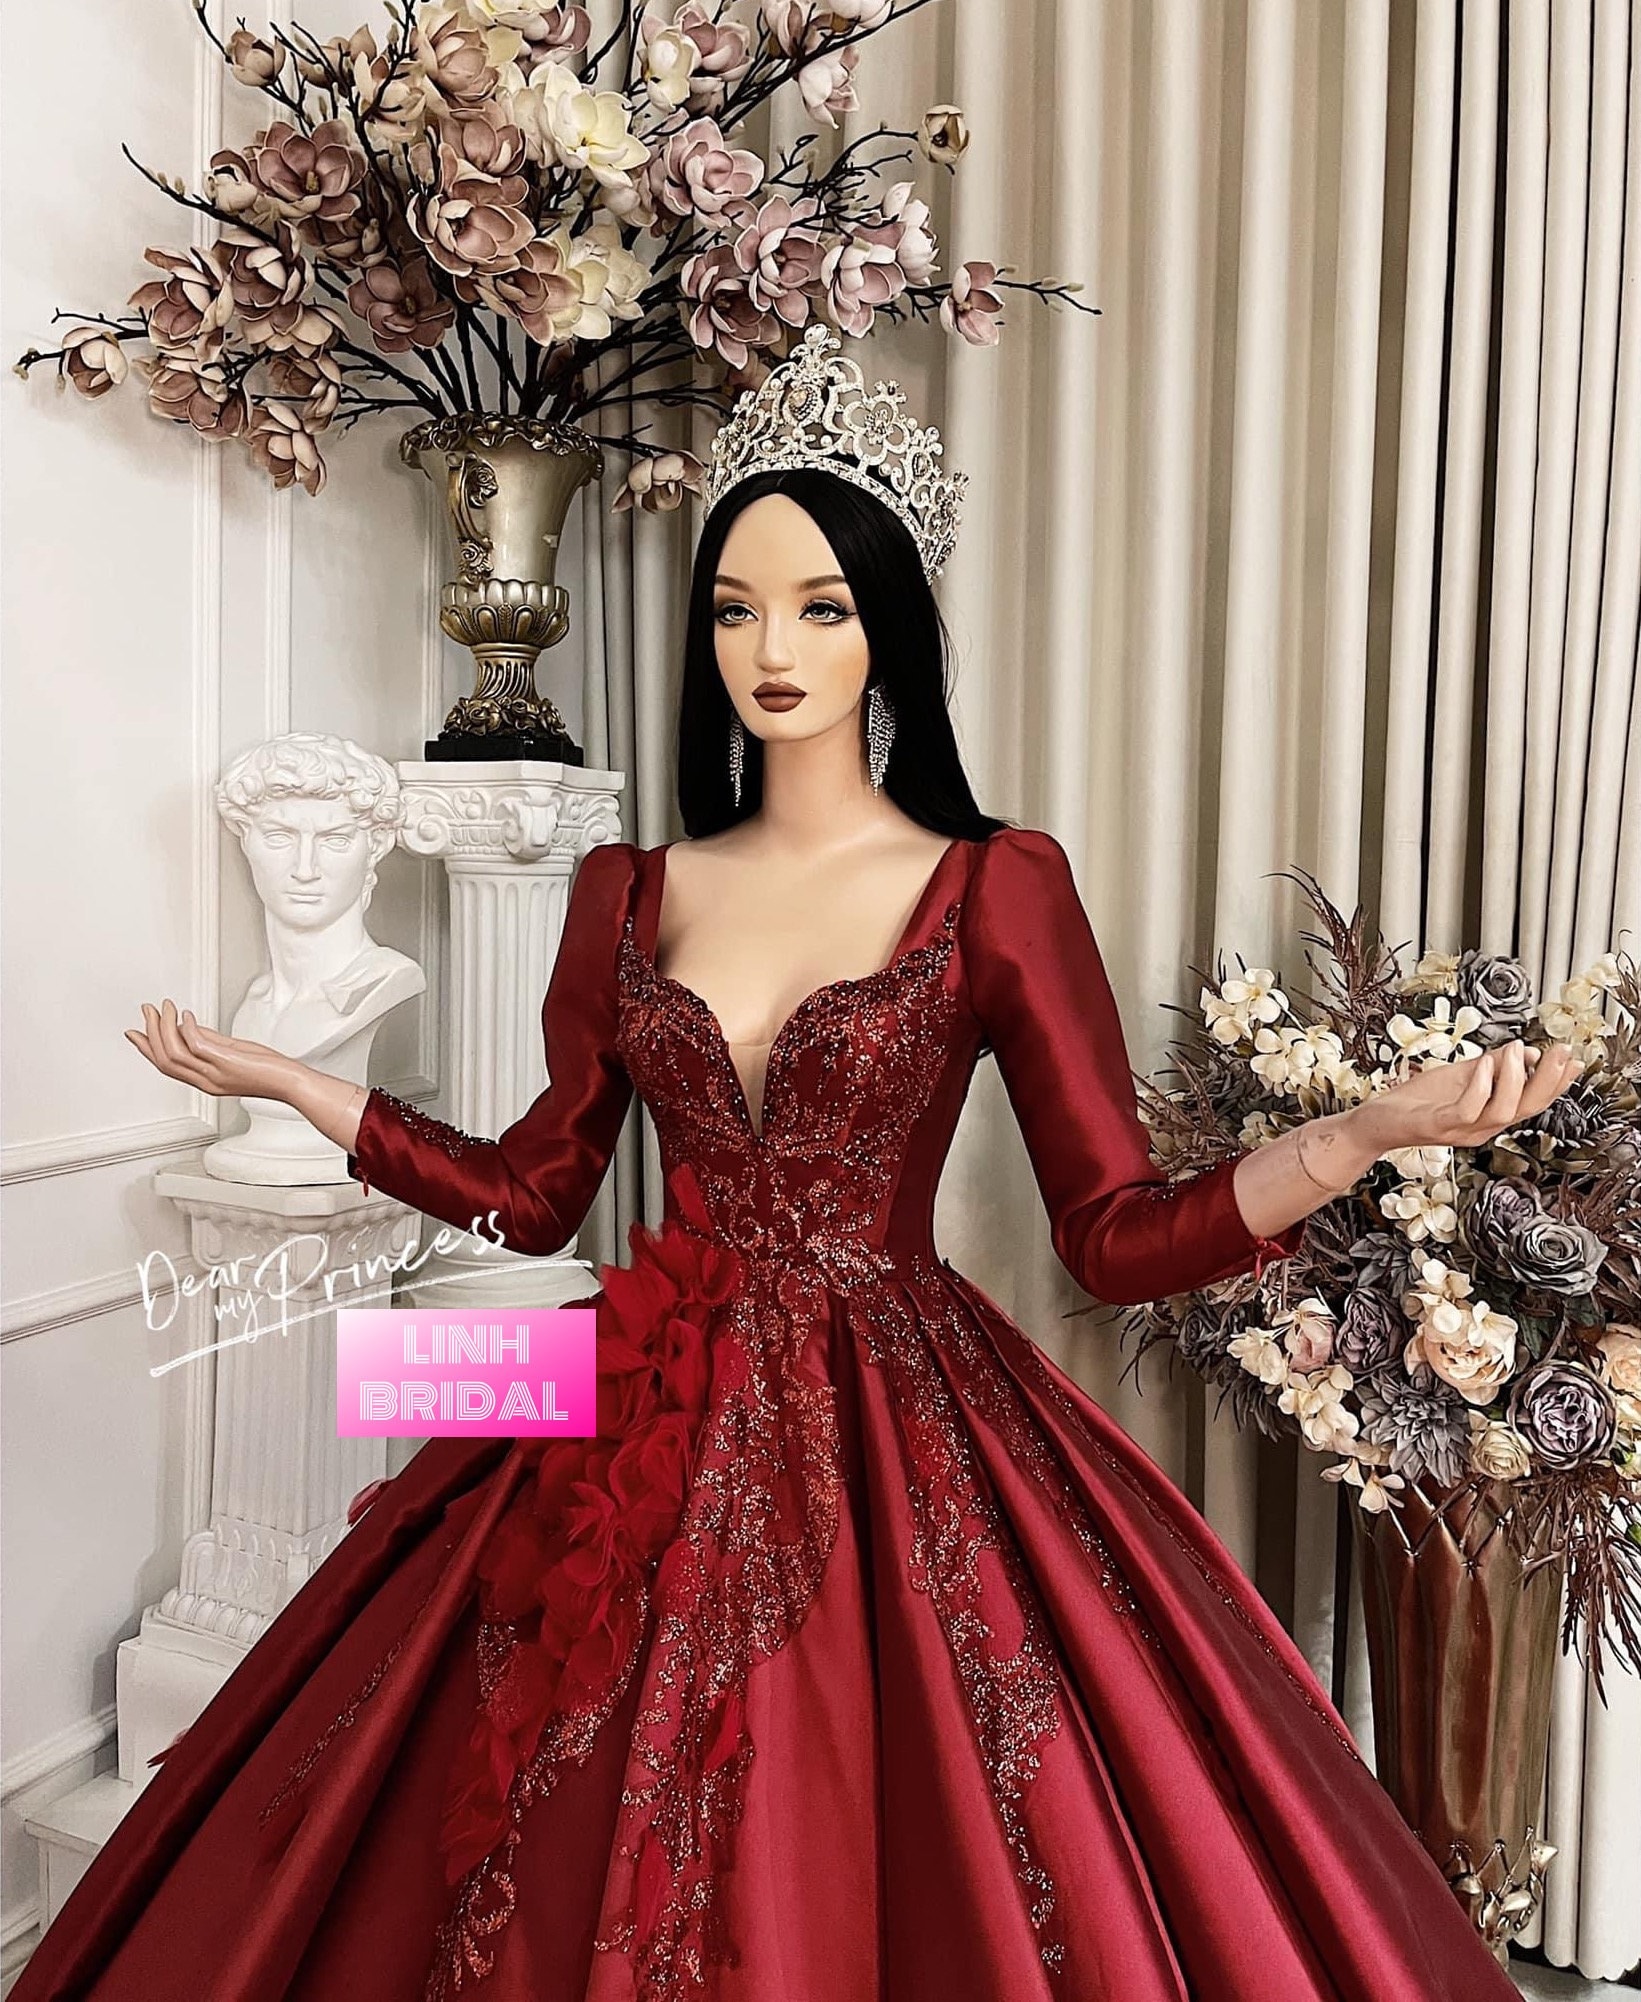 Dramatic red ball gown. | Gowns, Beautiful dresses, Gorgeous gowns